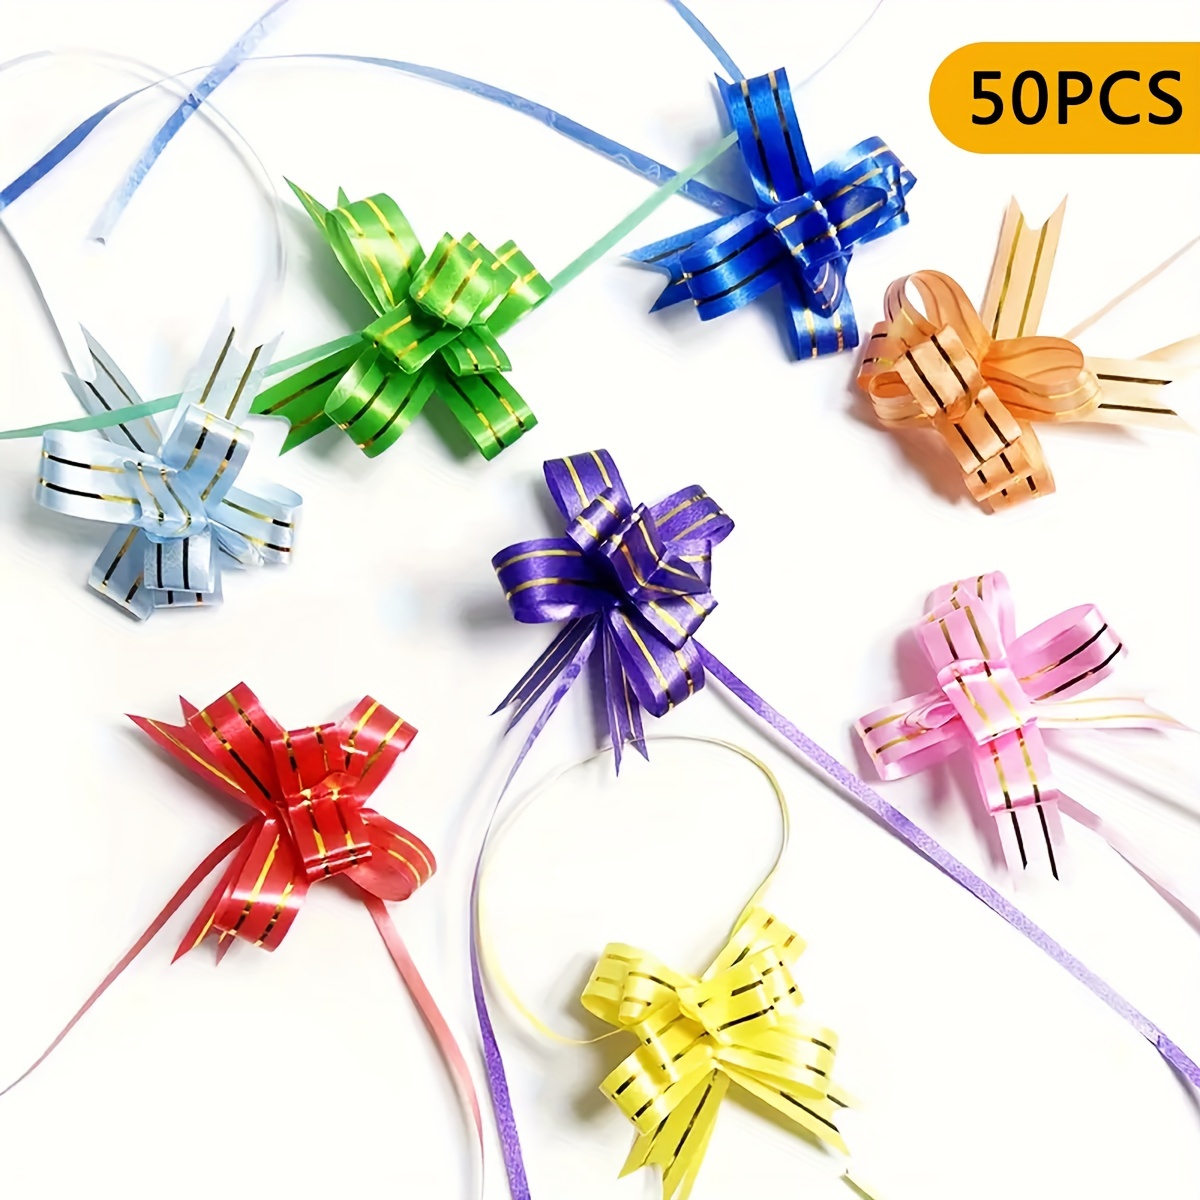 100 Pcs 5 Inch Pull Bows for Gift Wrapping, Gift Wrapping Pull Bows with  Ribbon for Christmas Presents Wedding Decor Gift Basket Gift Bag Holiday